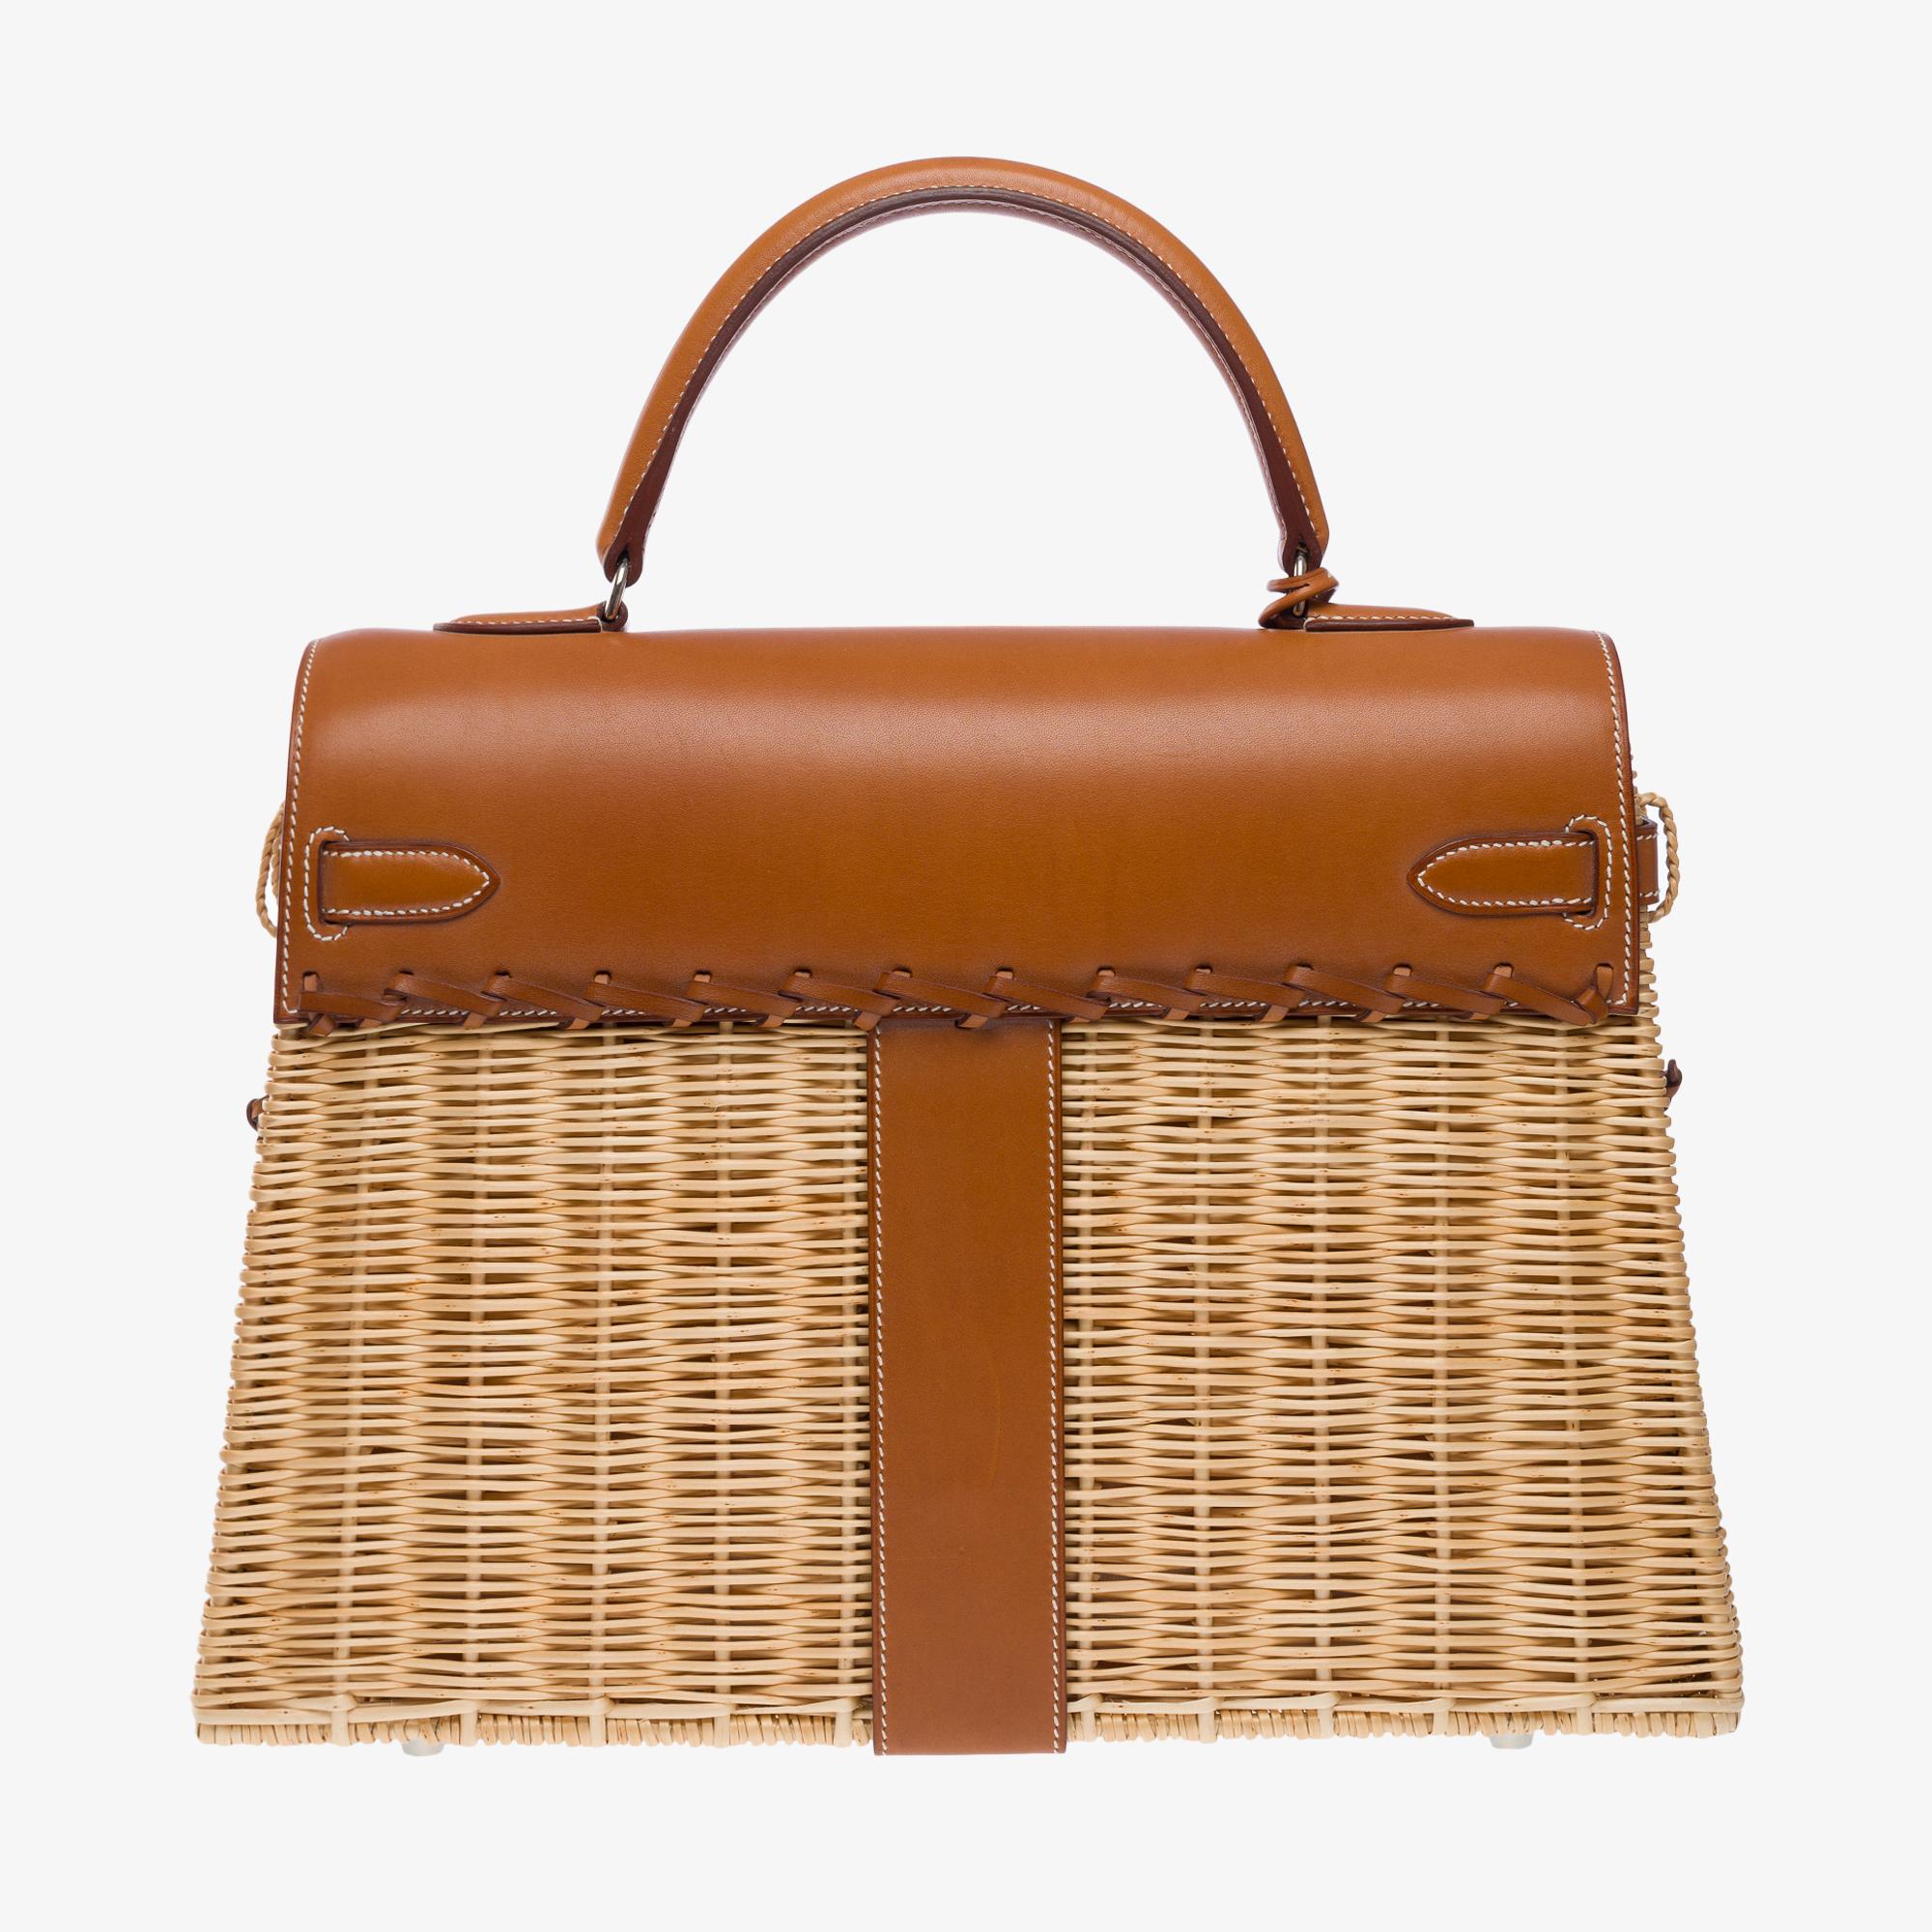 Women's or Men's Rare Hermes Kelly 35 Picnic in wicker and barenia leather , SHW